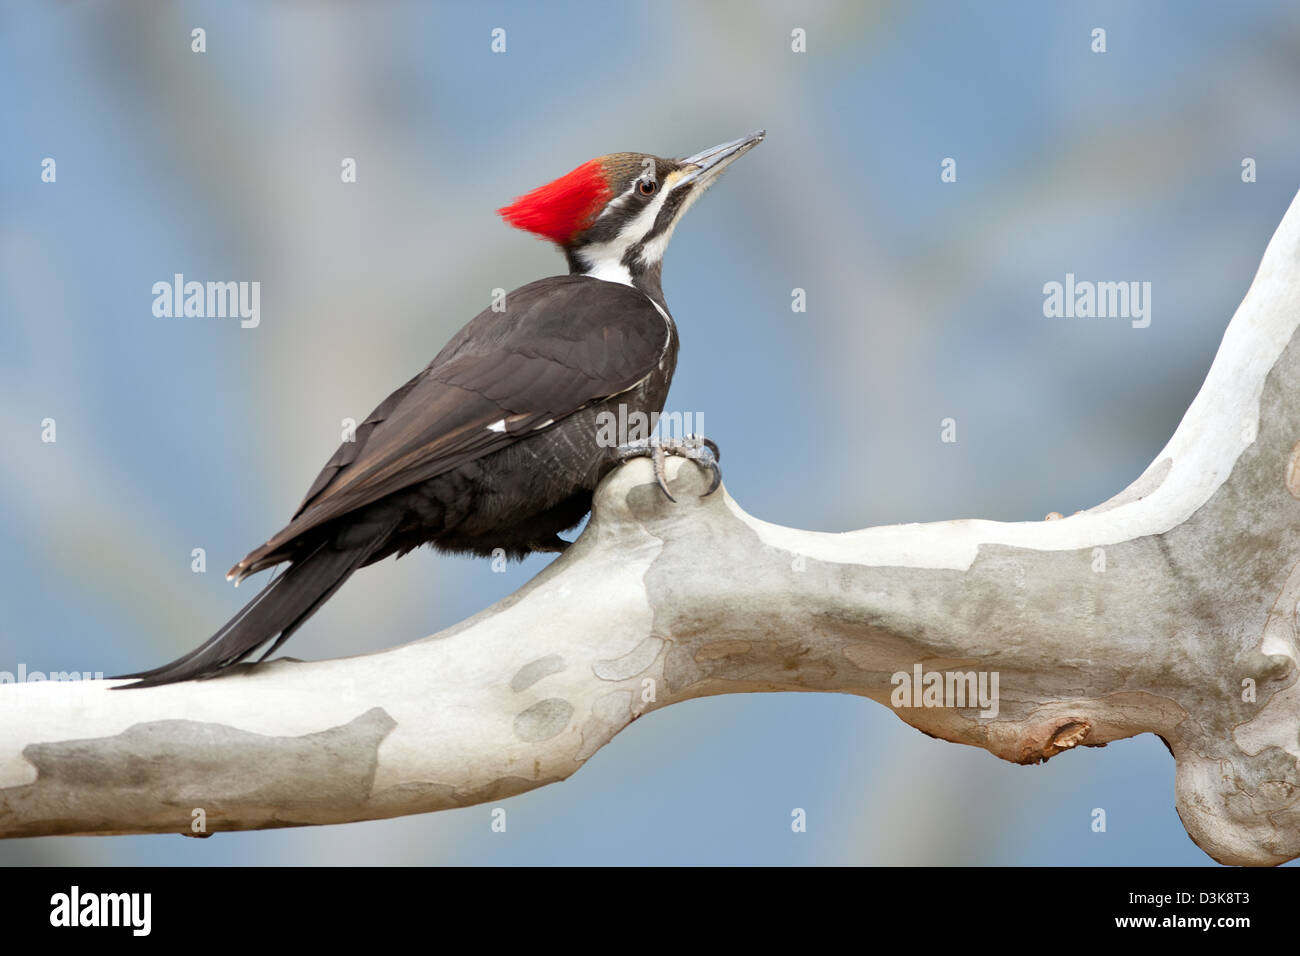 Female Pileated Woodpecker on Sycamore Tree bird birds woodpeckers Ornithology Science Nature Wildlife Environment Stock Photo